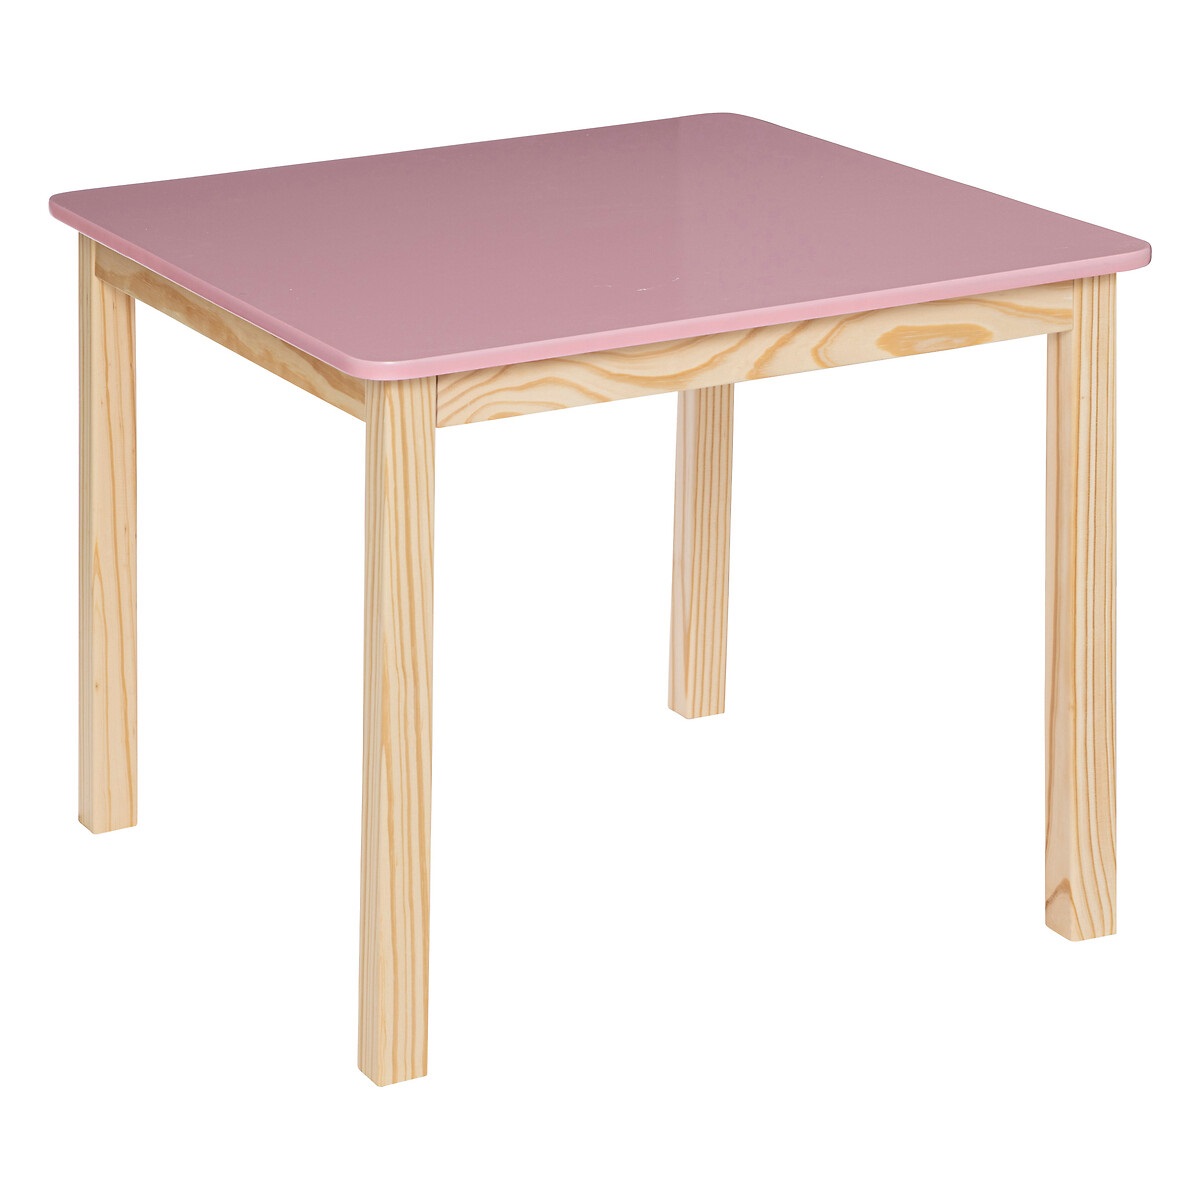 Wooden table for the children's room, antique rose/natural 